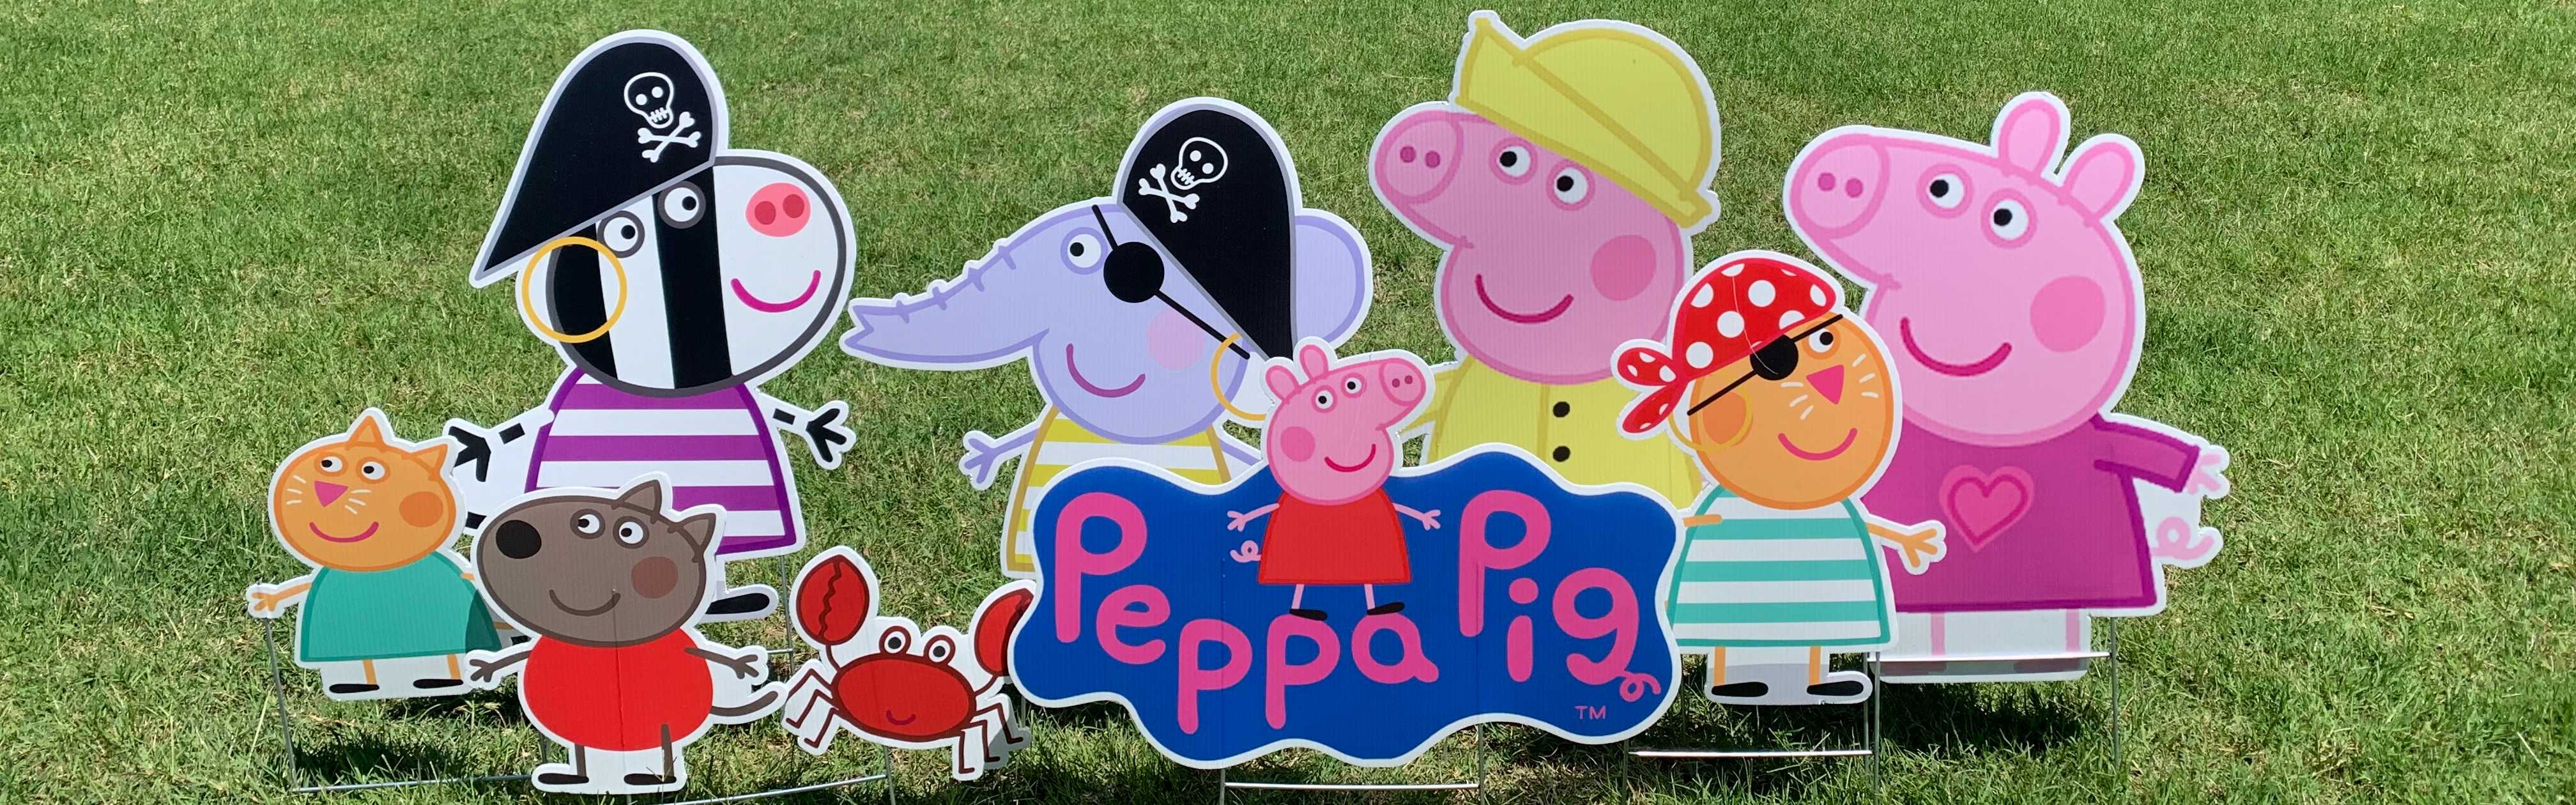 Yard card sign collection peppa pig 